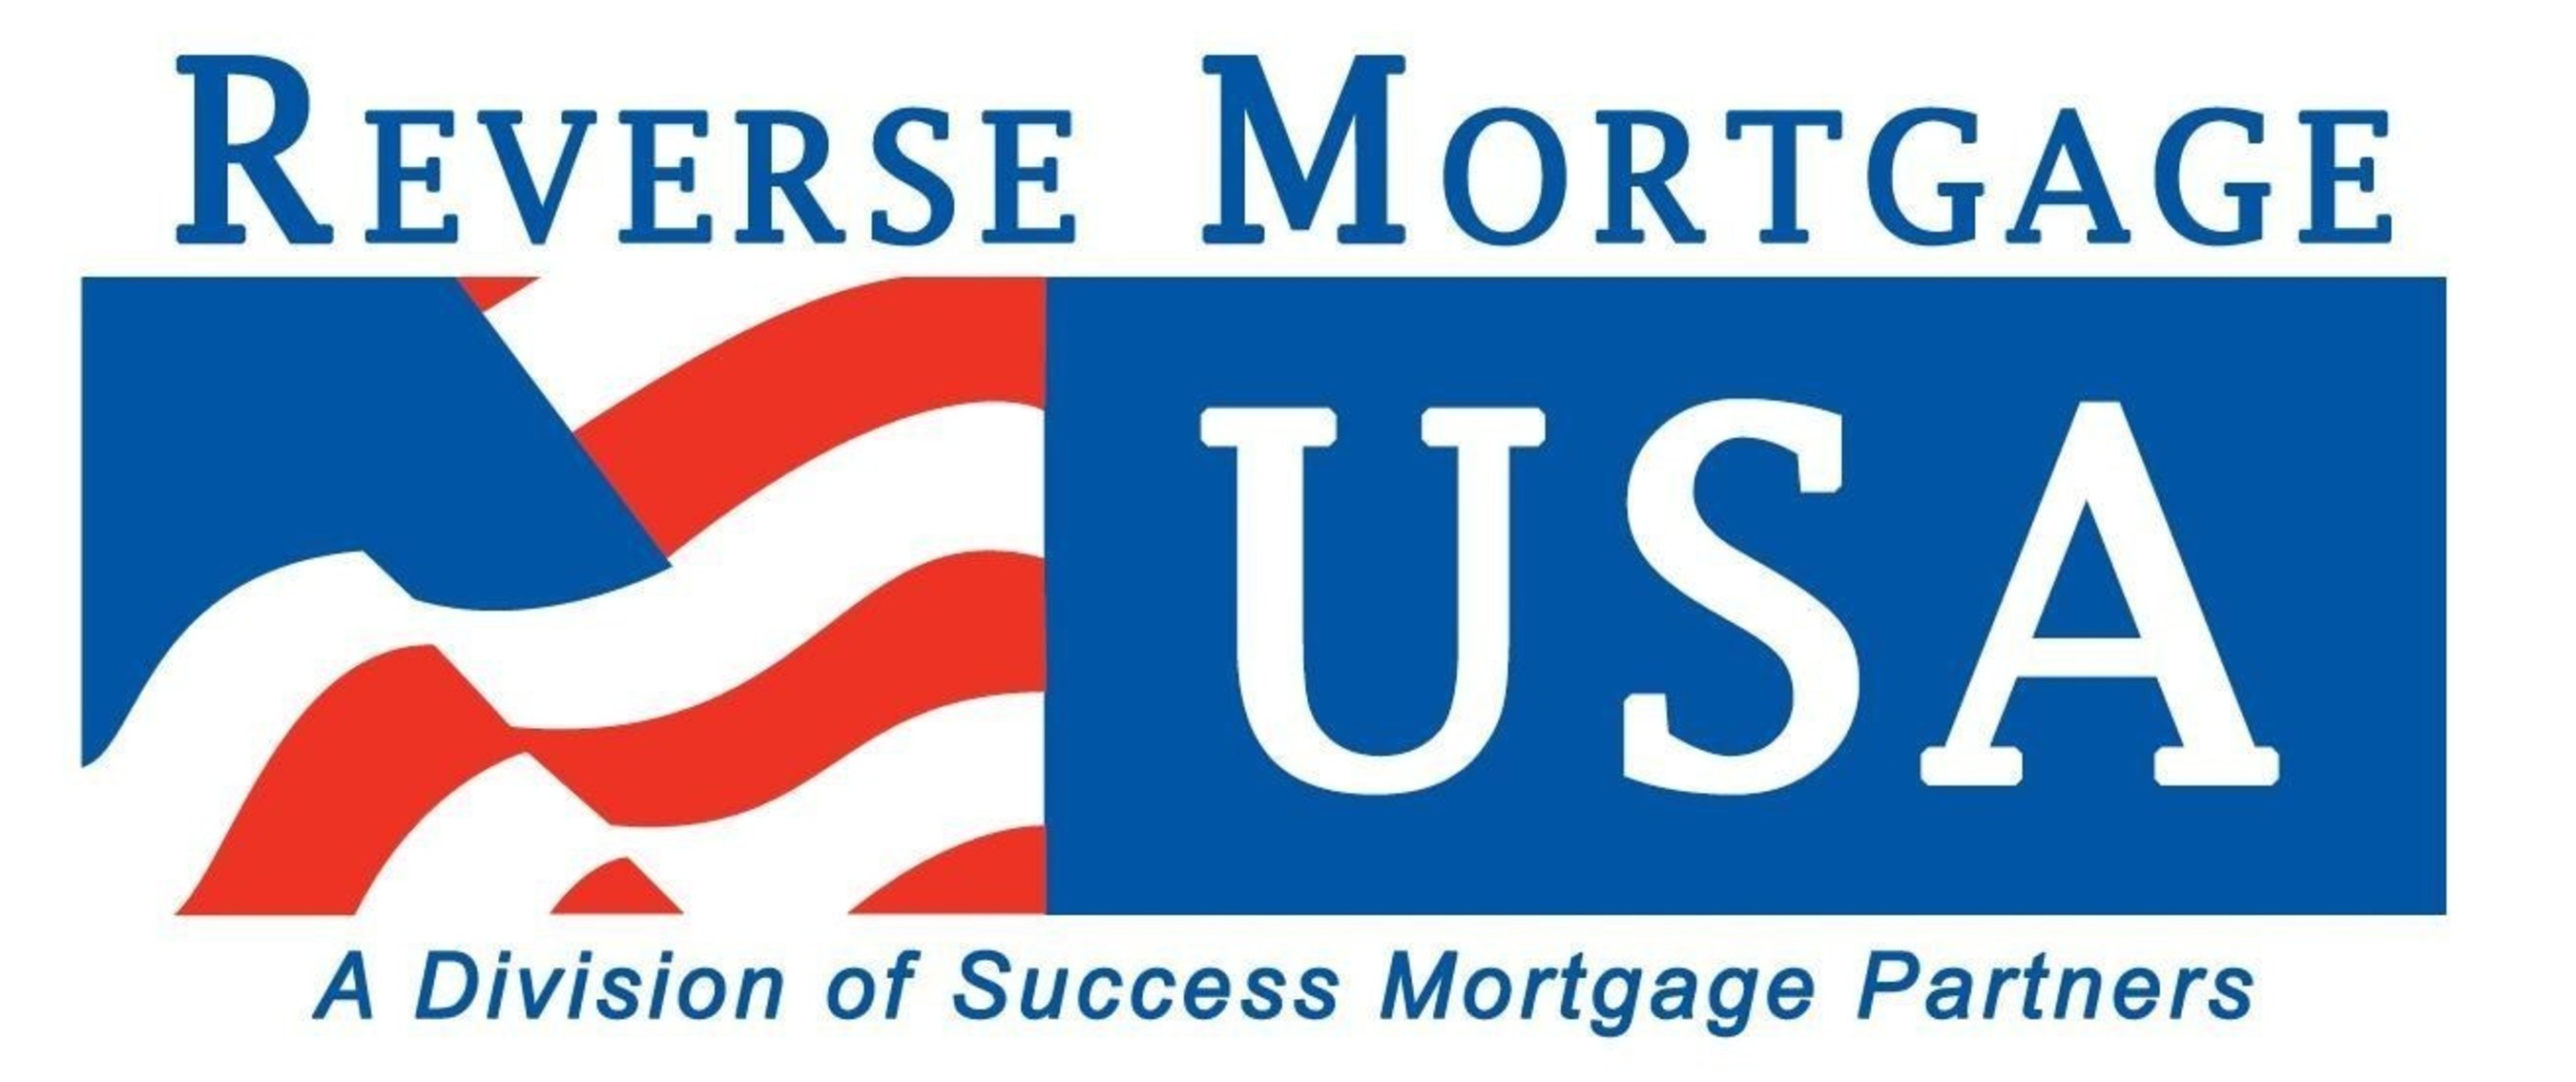 Reverse Mortgage USA, a Division of Success Mortgage Partners